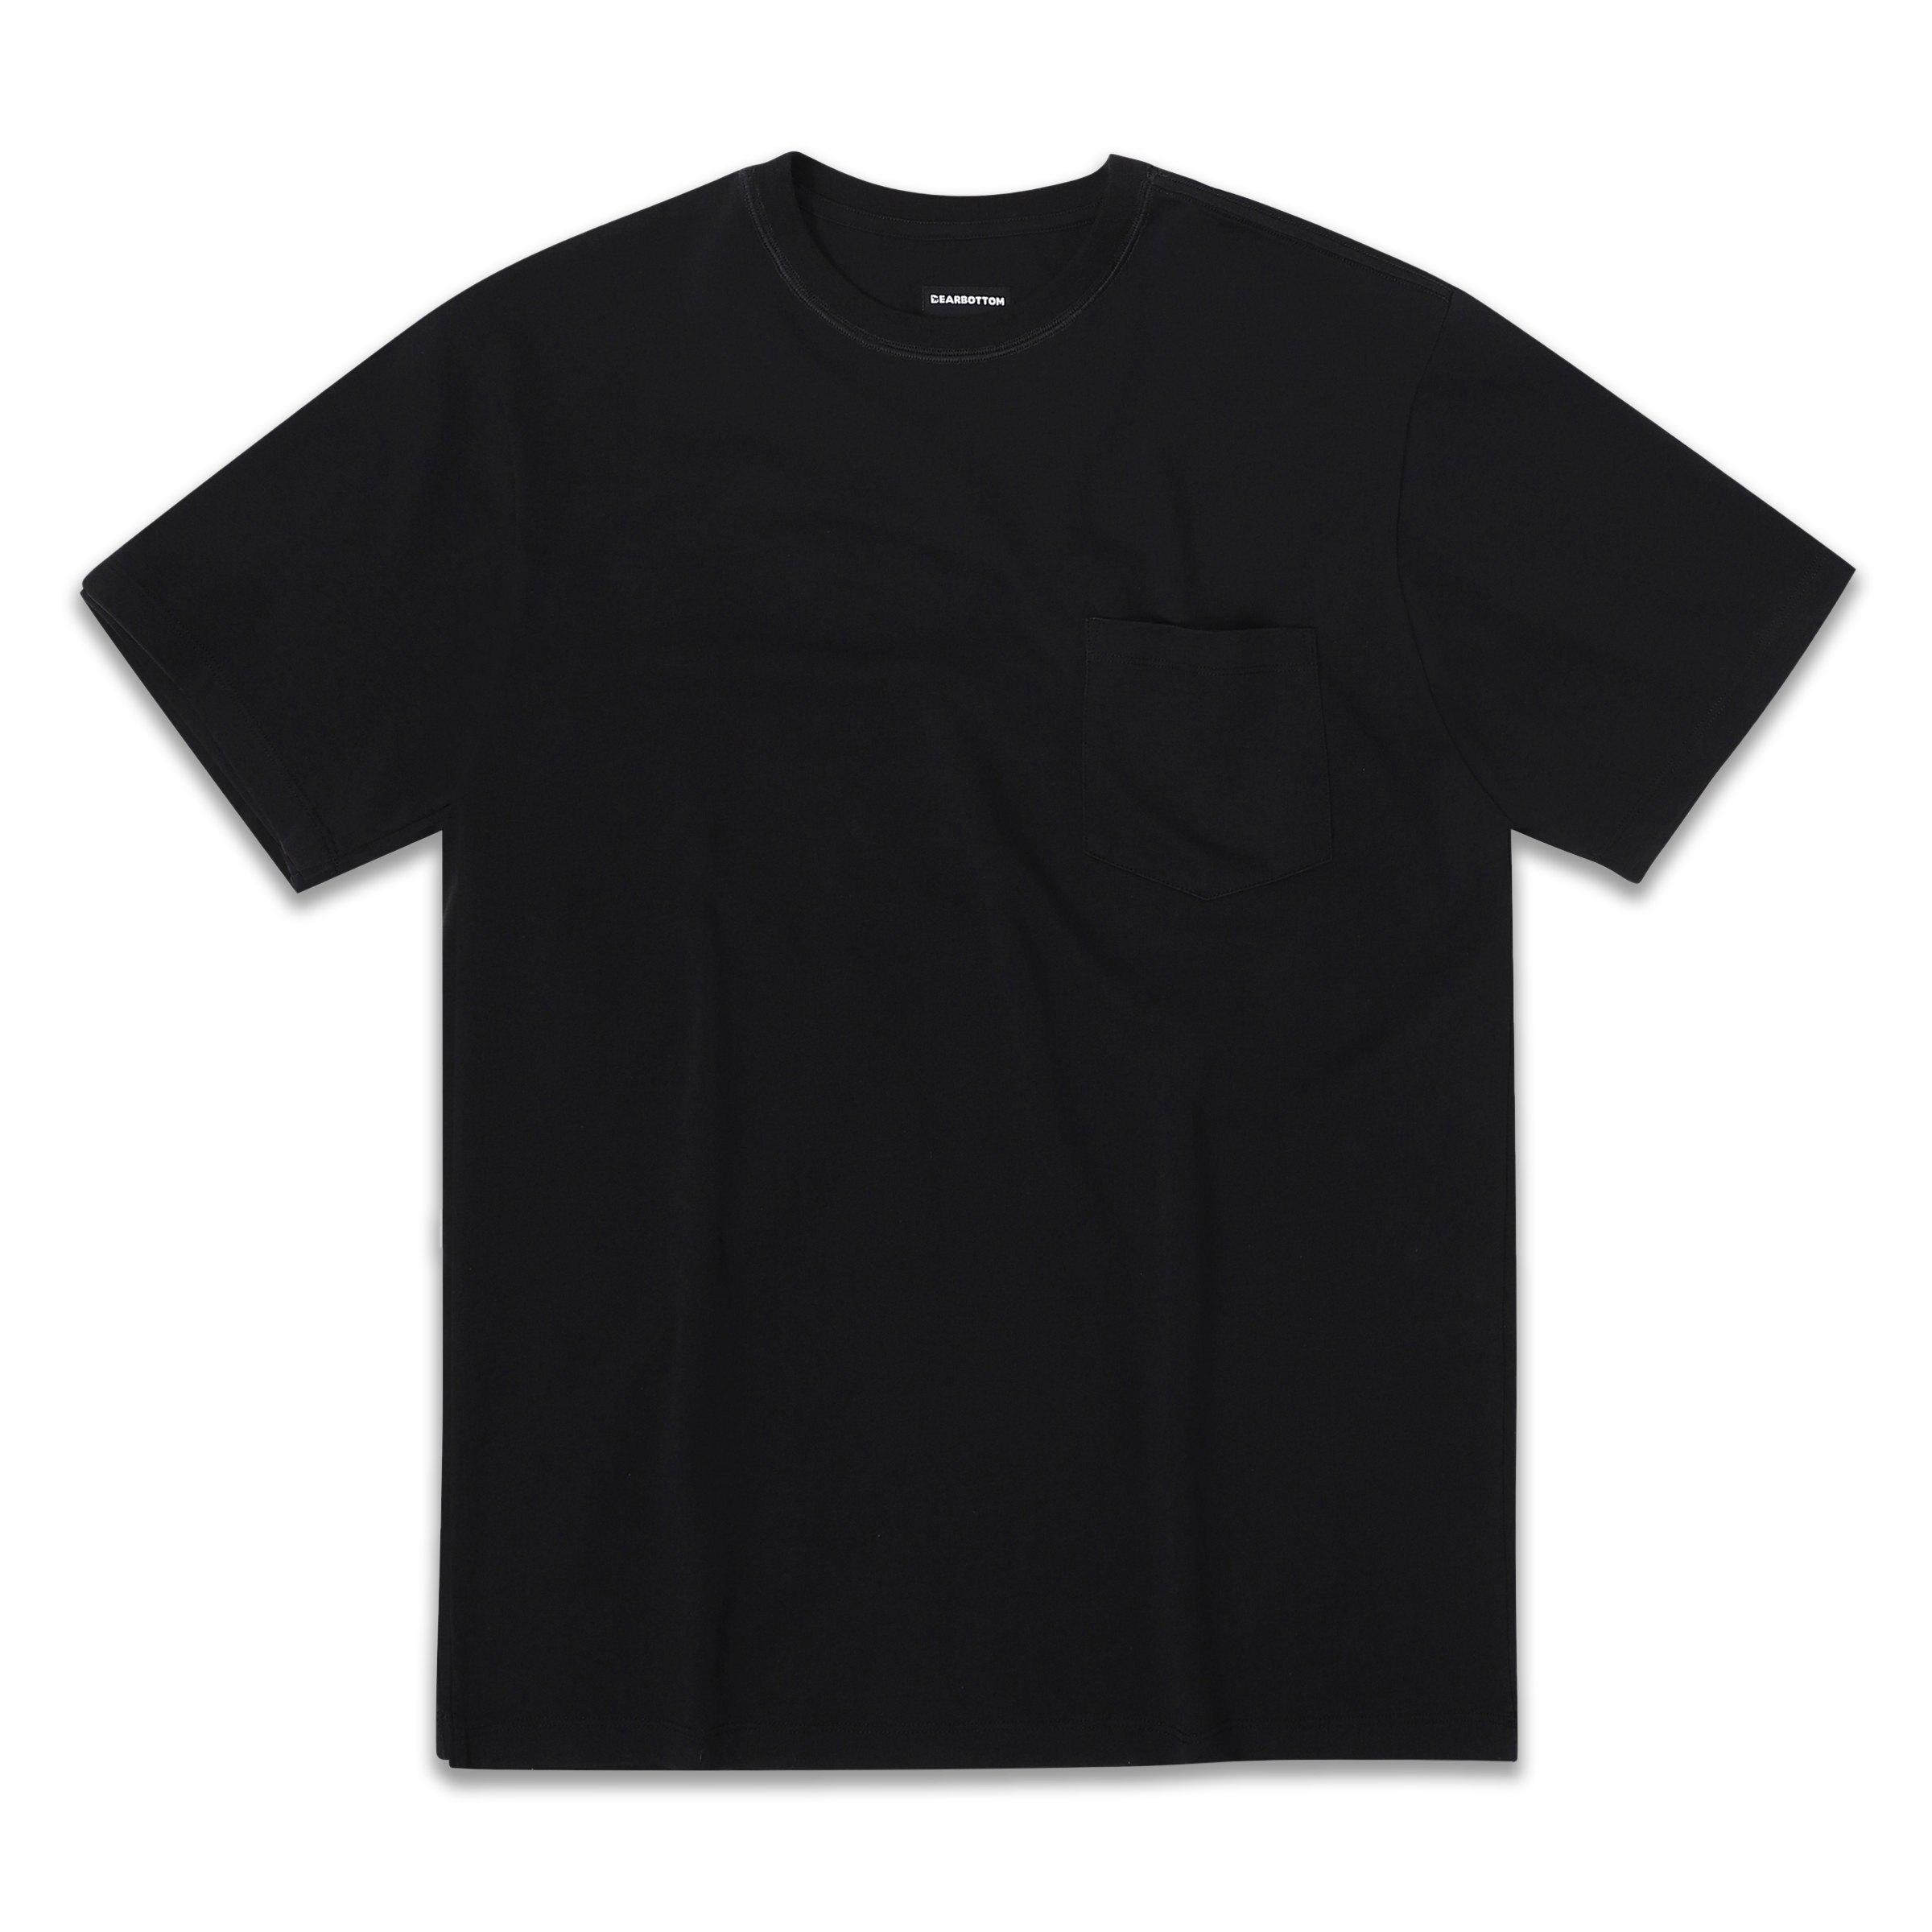 Supima Heavyweight Tee Black front with crewneck, short sleeves, and pocket on left chest